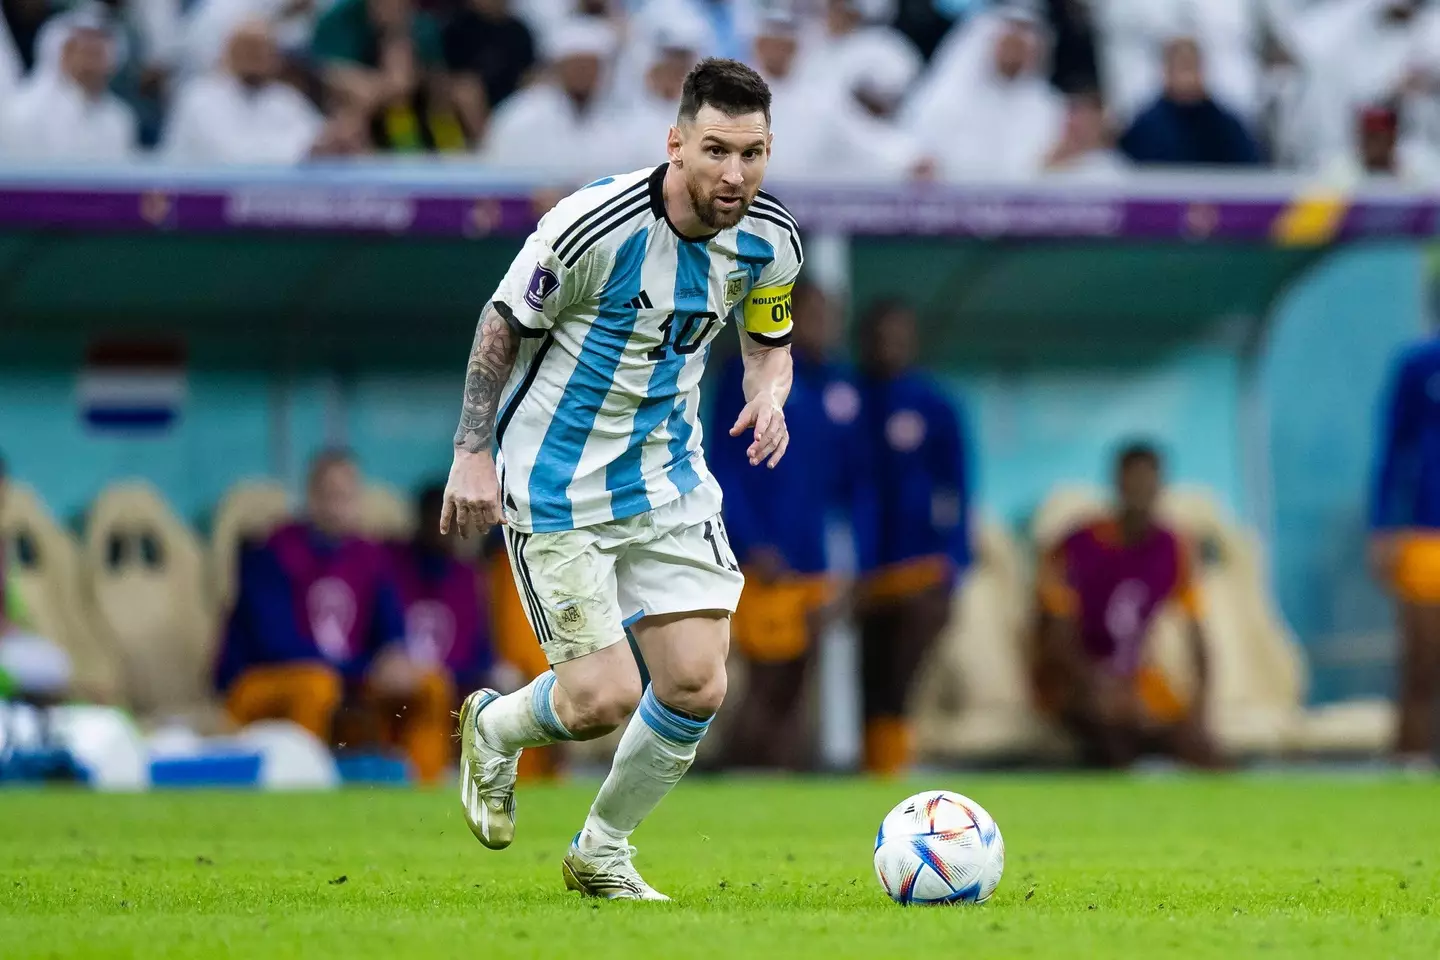 Lionel Messi is hoping to lead Argentina to World Cup glory.